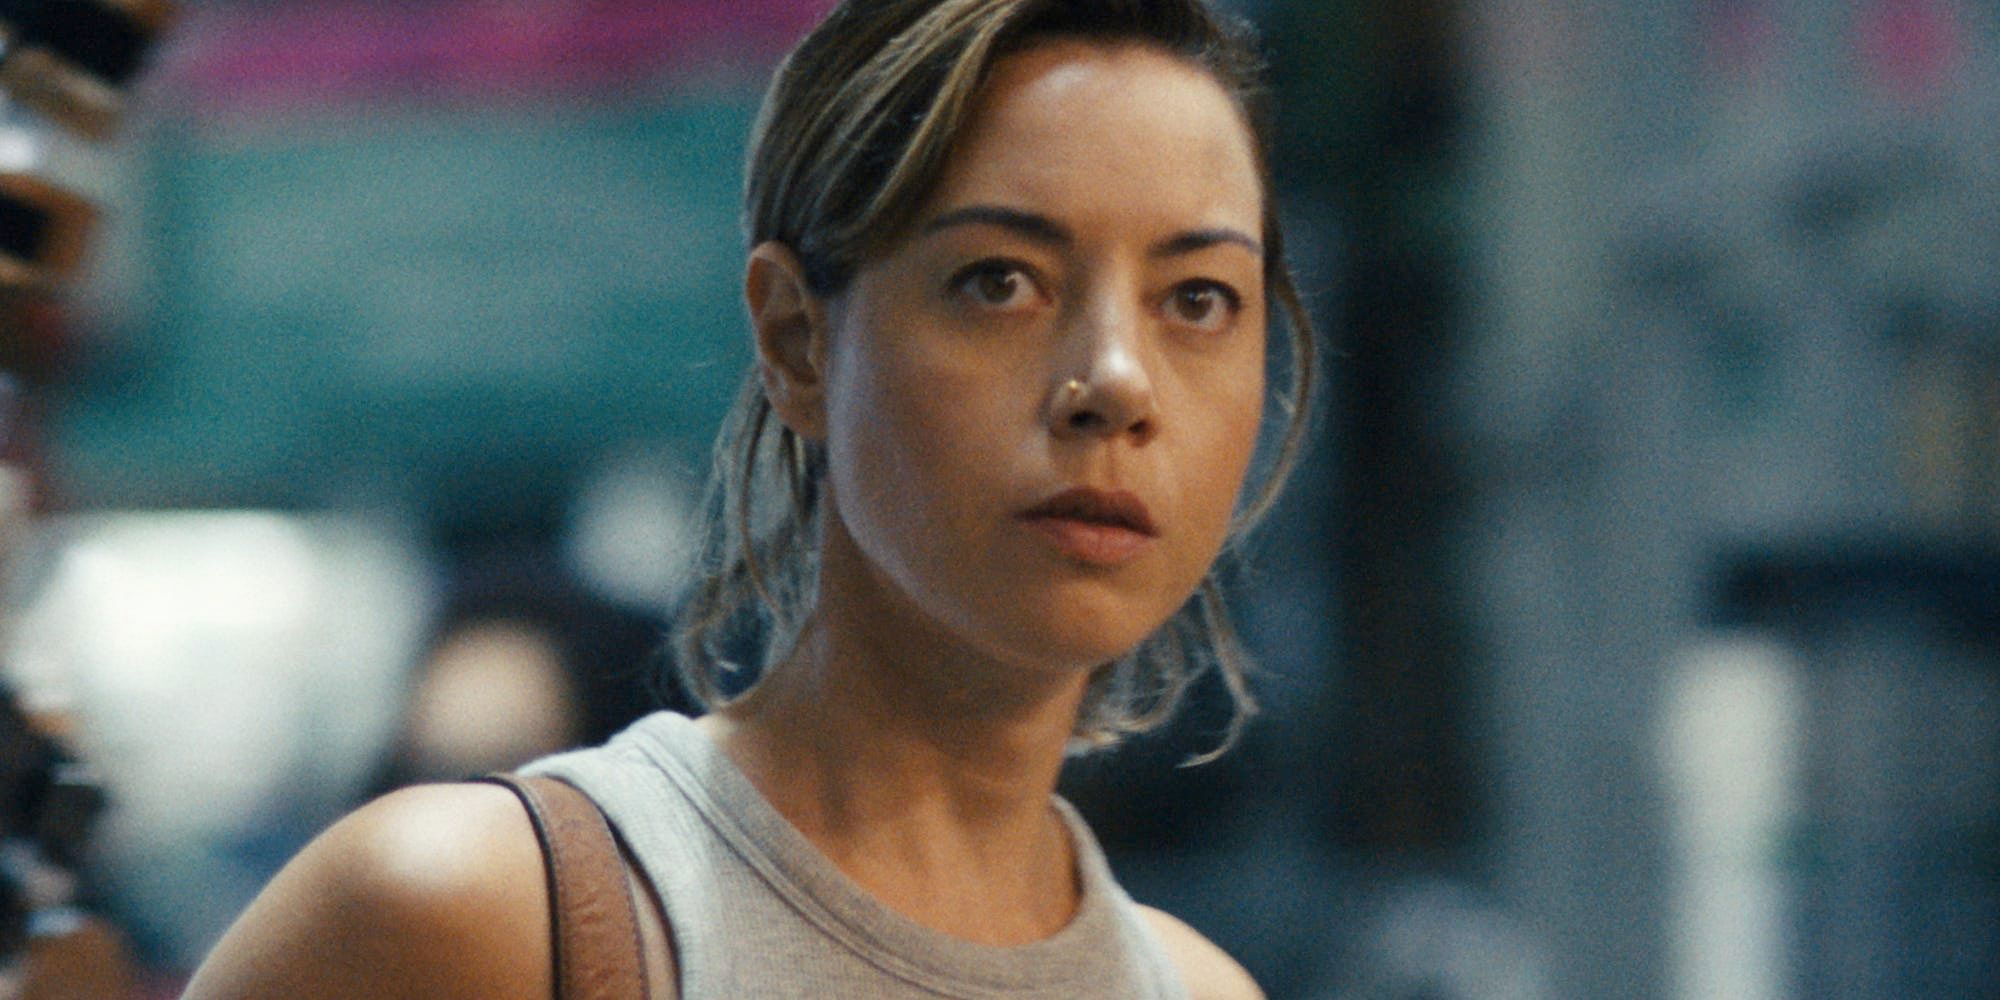 Aubrey Plaza's Action Movie With 94% RT Score Is Getting TV Show